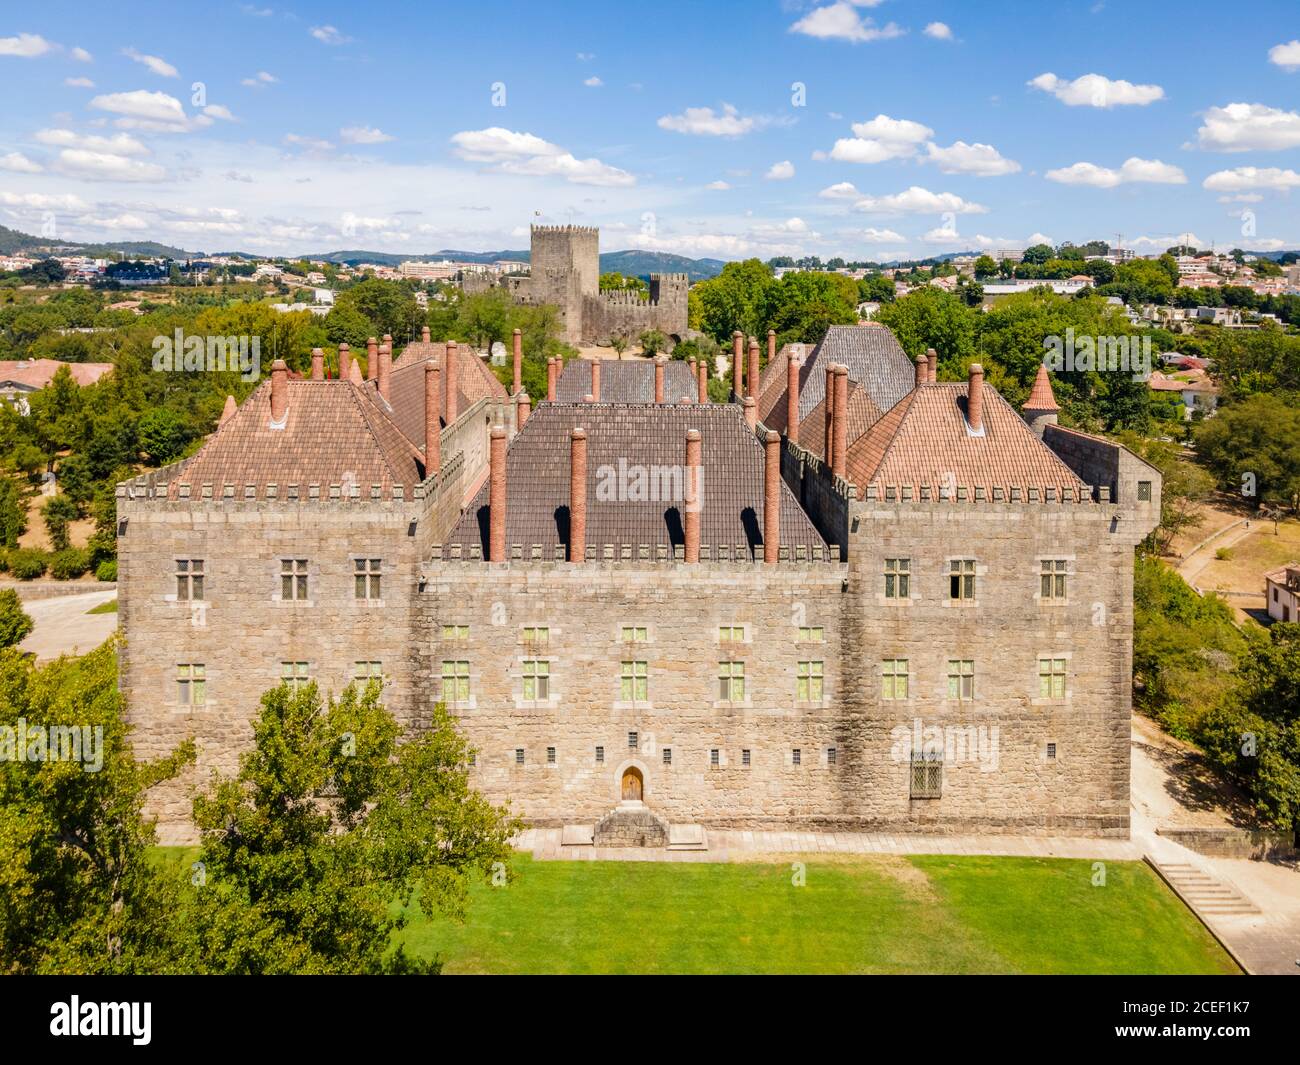 Aerial view of palace of dukes of Braganza and Castle in Guimaraes, Portugal Stock Photo